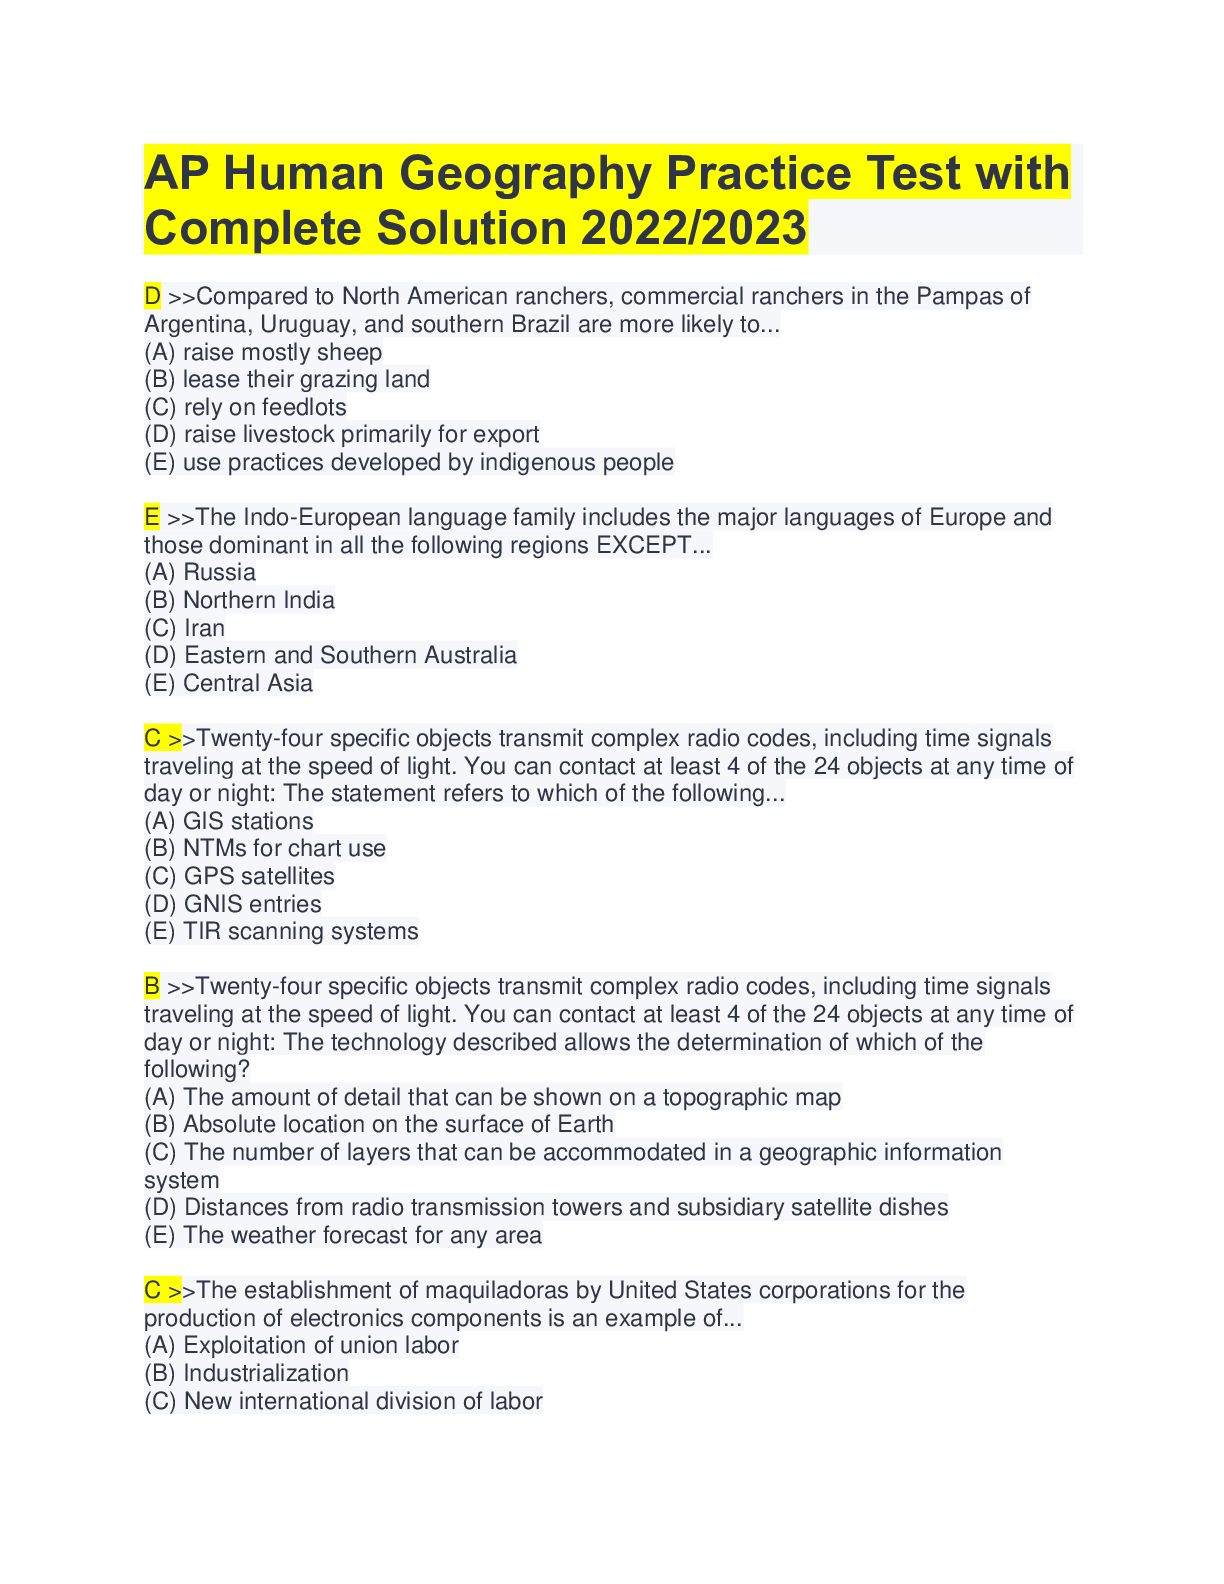 ap-human-geography-practice-test-with-complete-solution-2022-2023